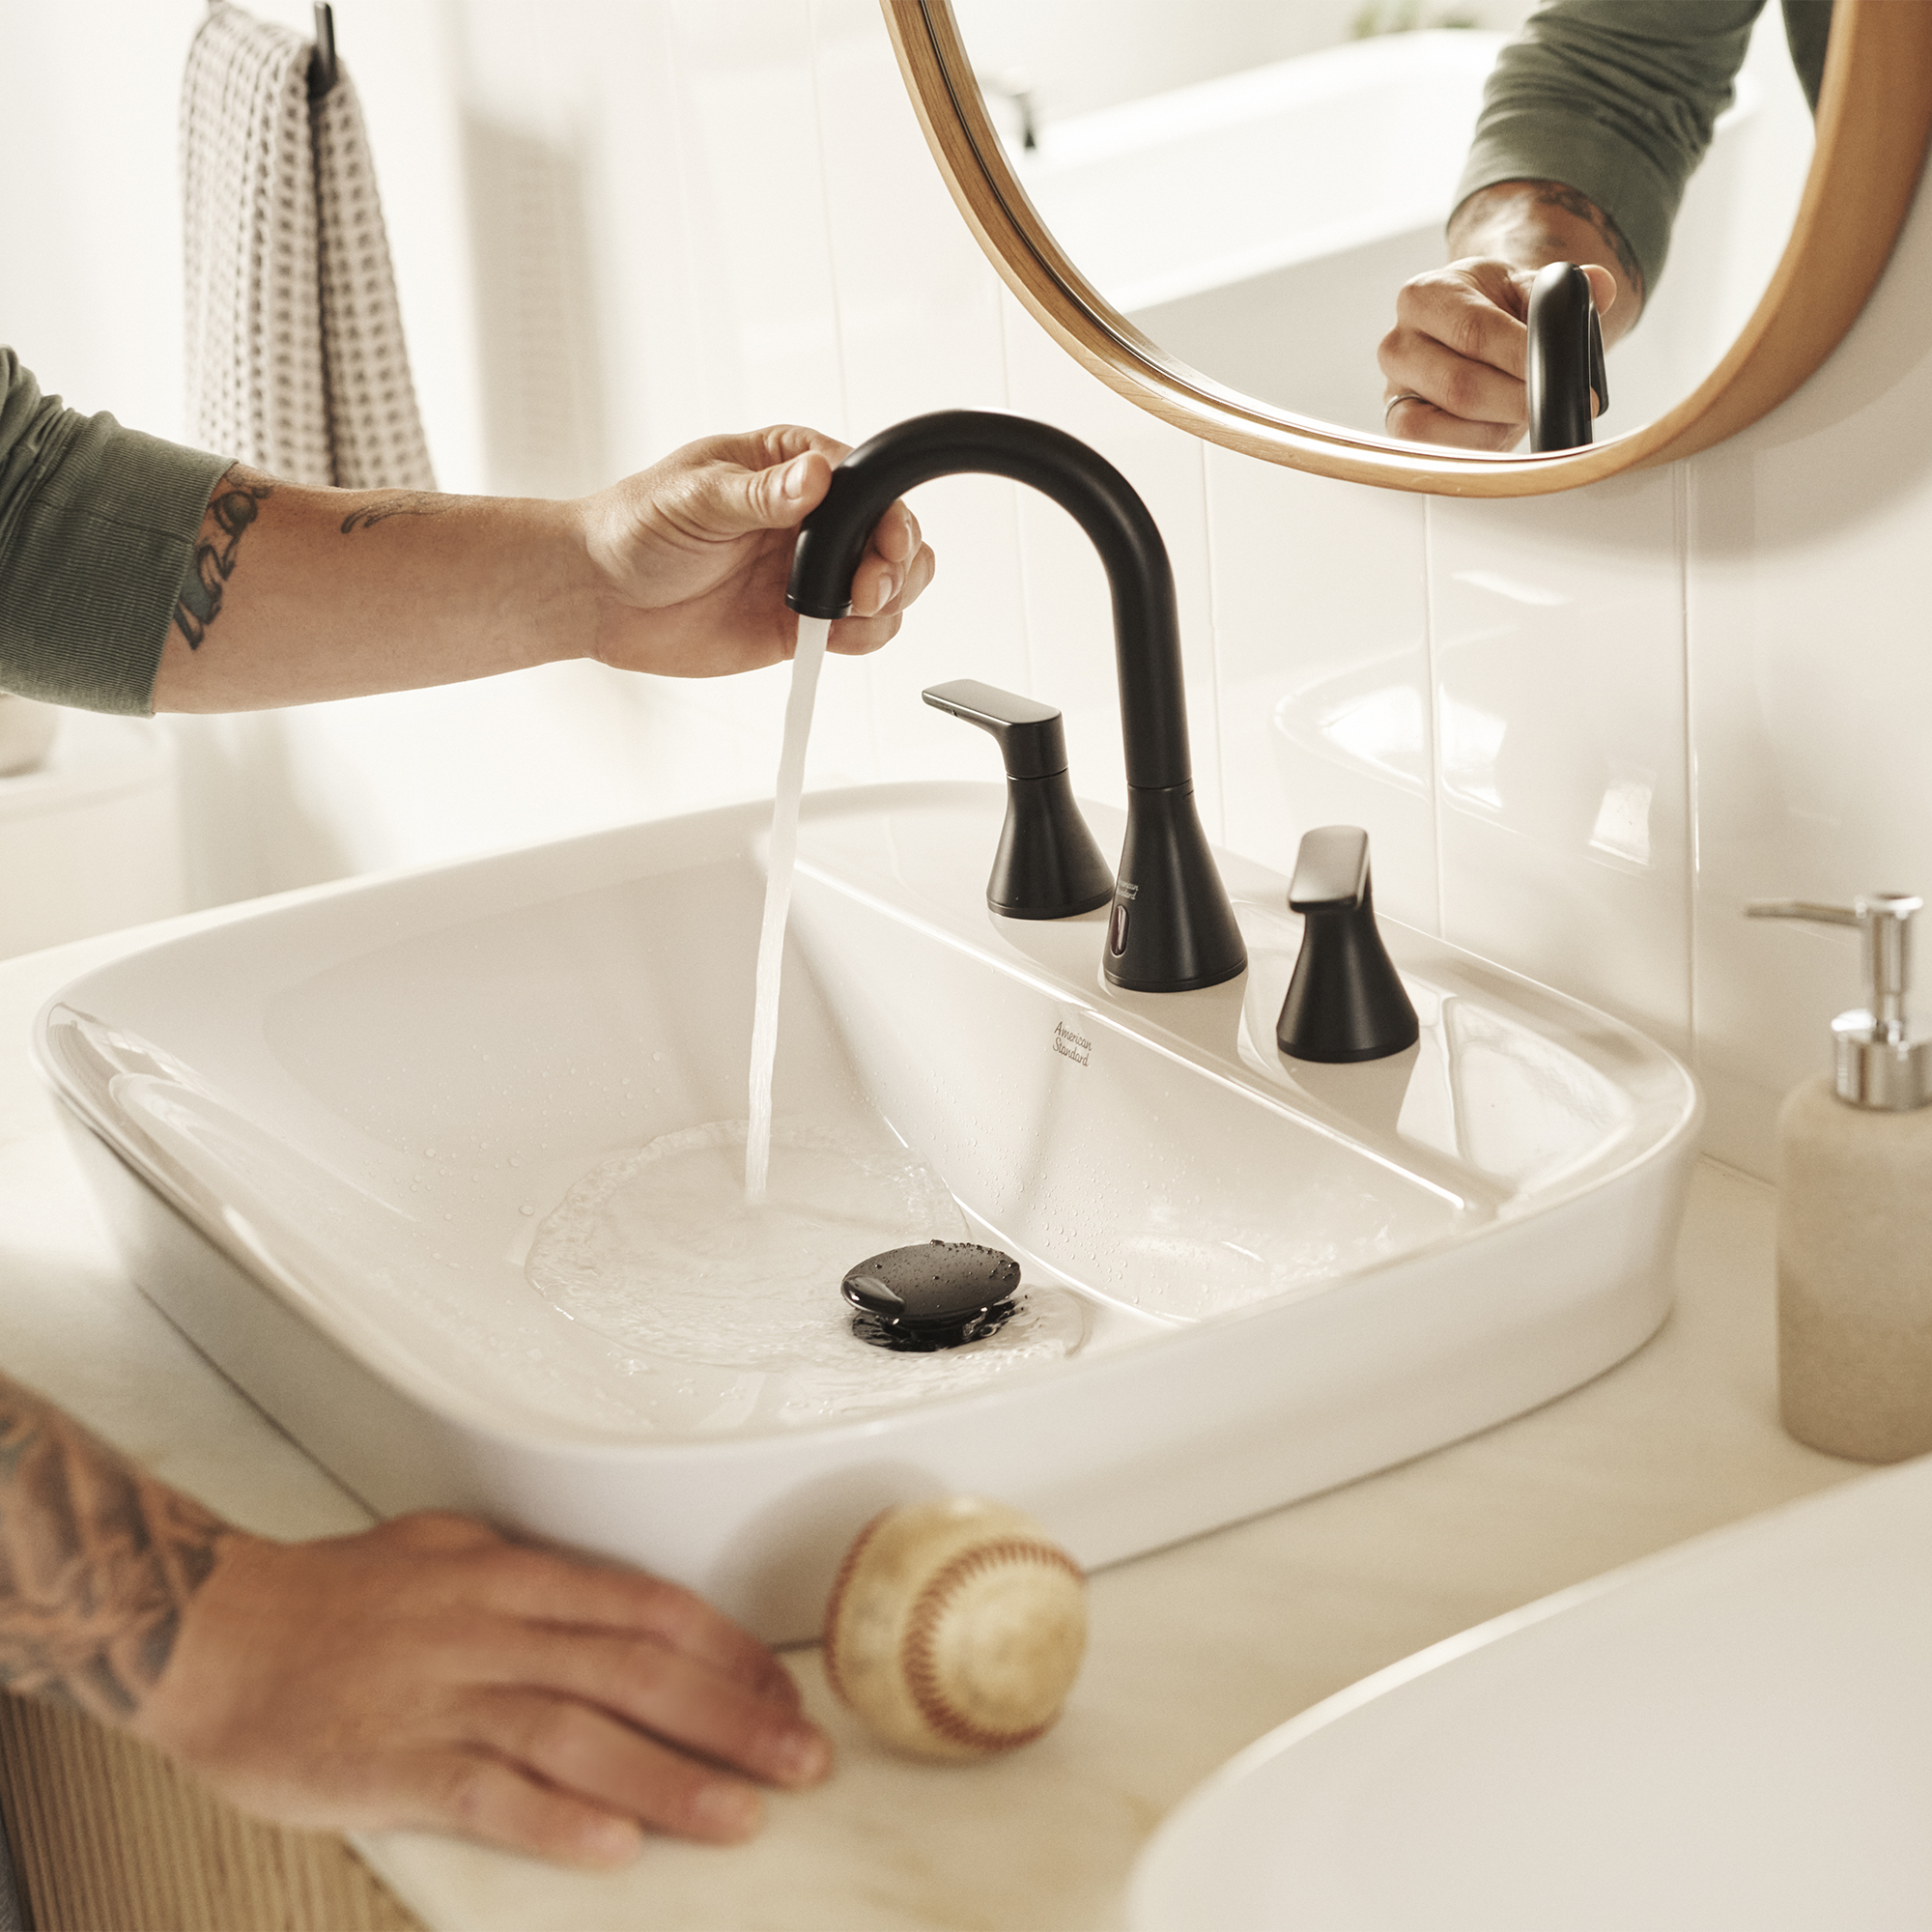 Aspirations 8-Inch Widespread 2-Handle Pull-Down Bathroom Faucet 1.2  gpm/4.5 L/min With Lever Handles